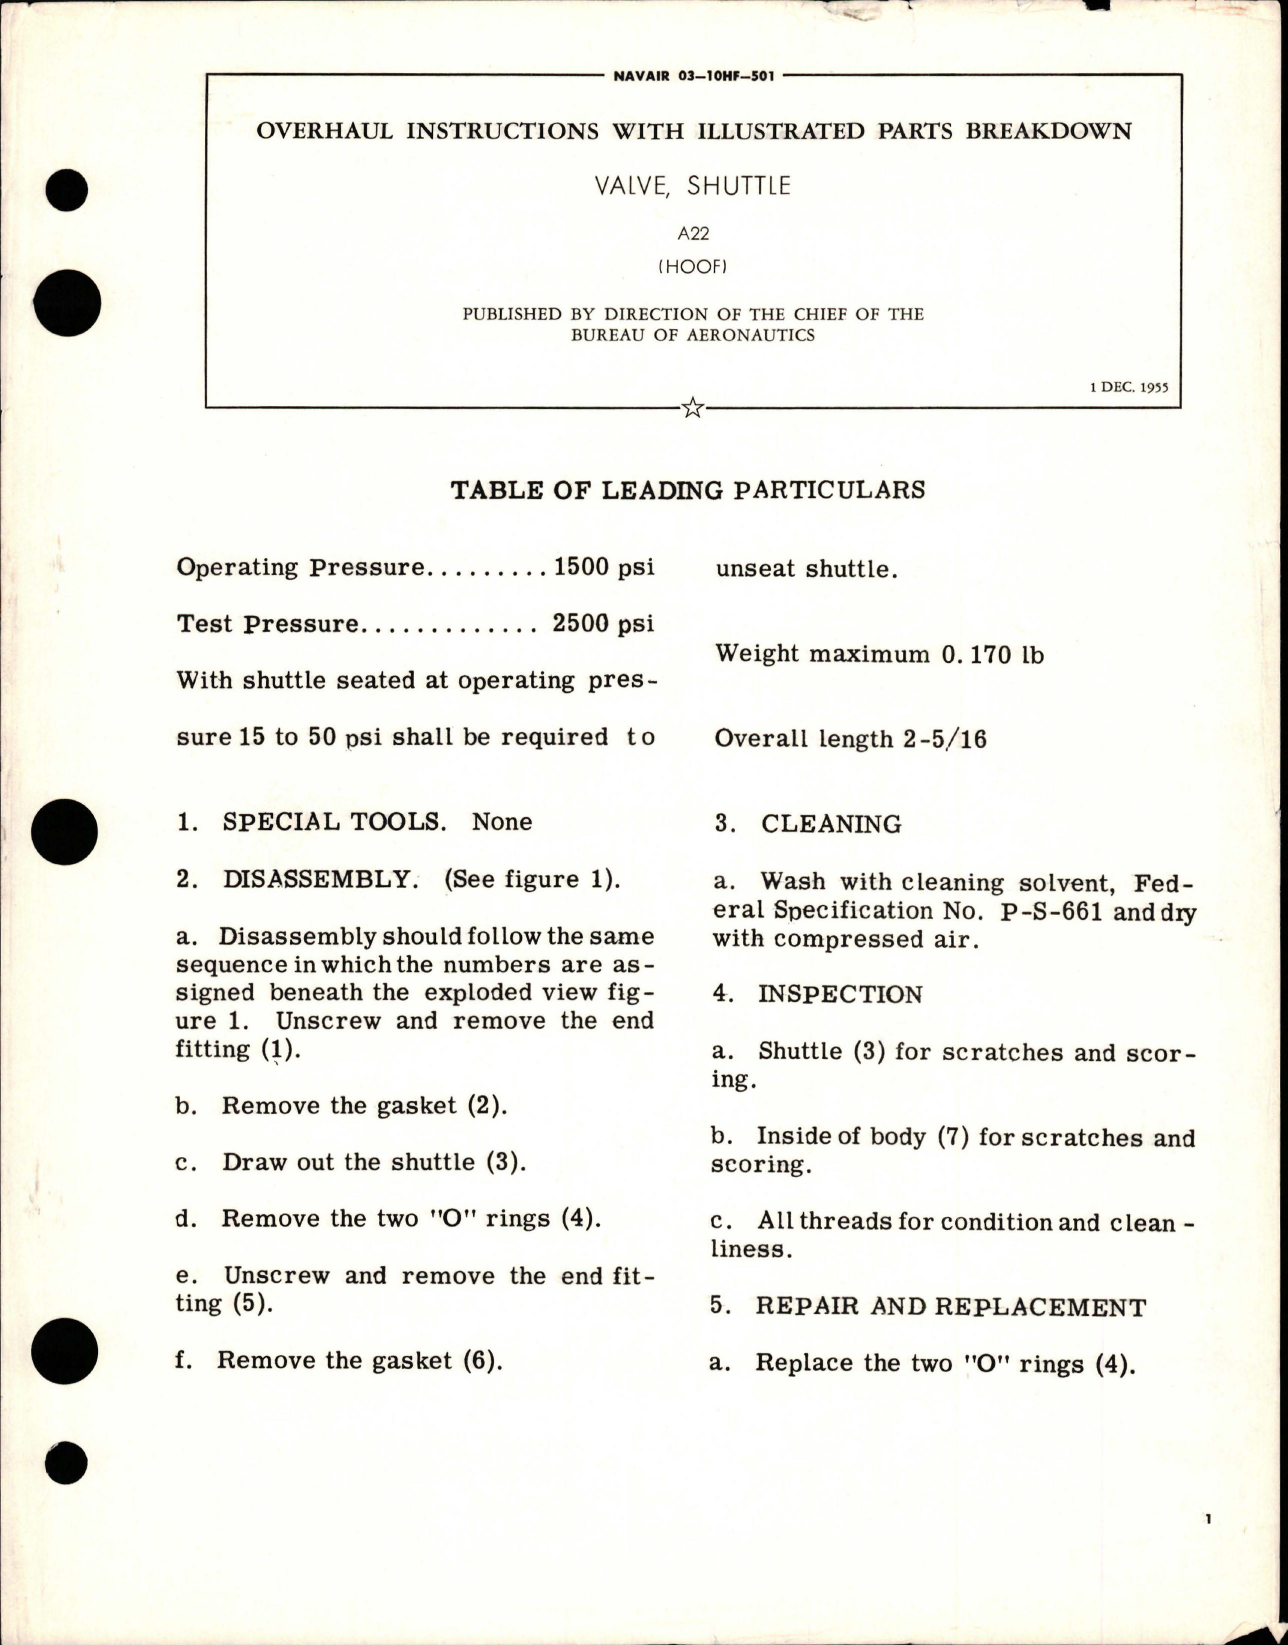 Sample page 1 from AirCorps Library document: Overhaul Instructions with Illustrated Parts Breakdown for Shuttle Valve - A22